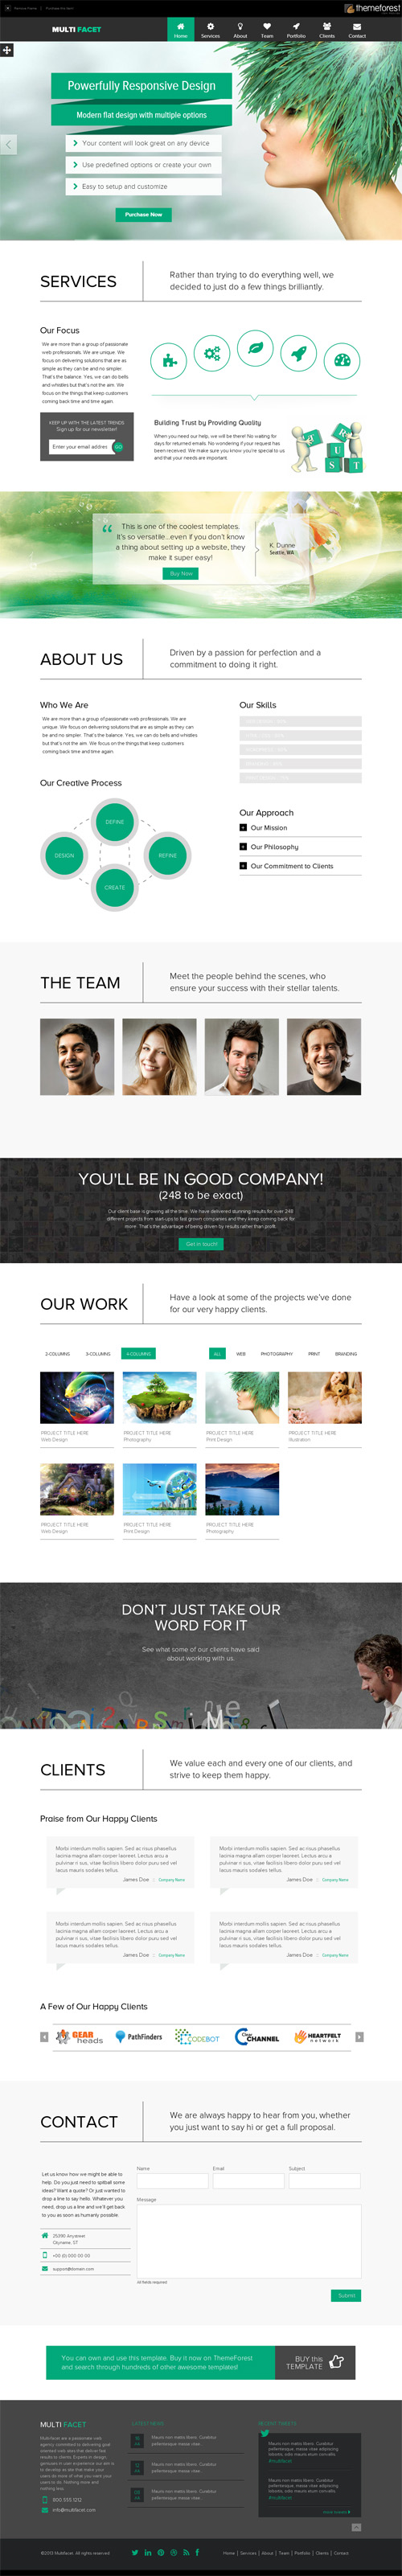 MultiFacet - Responsive One Page Template